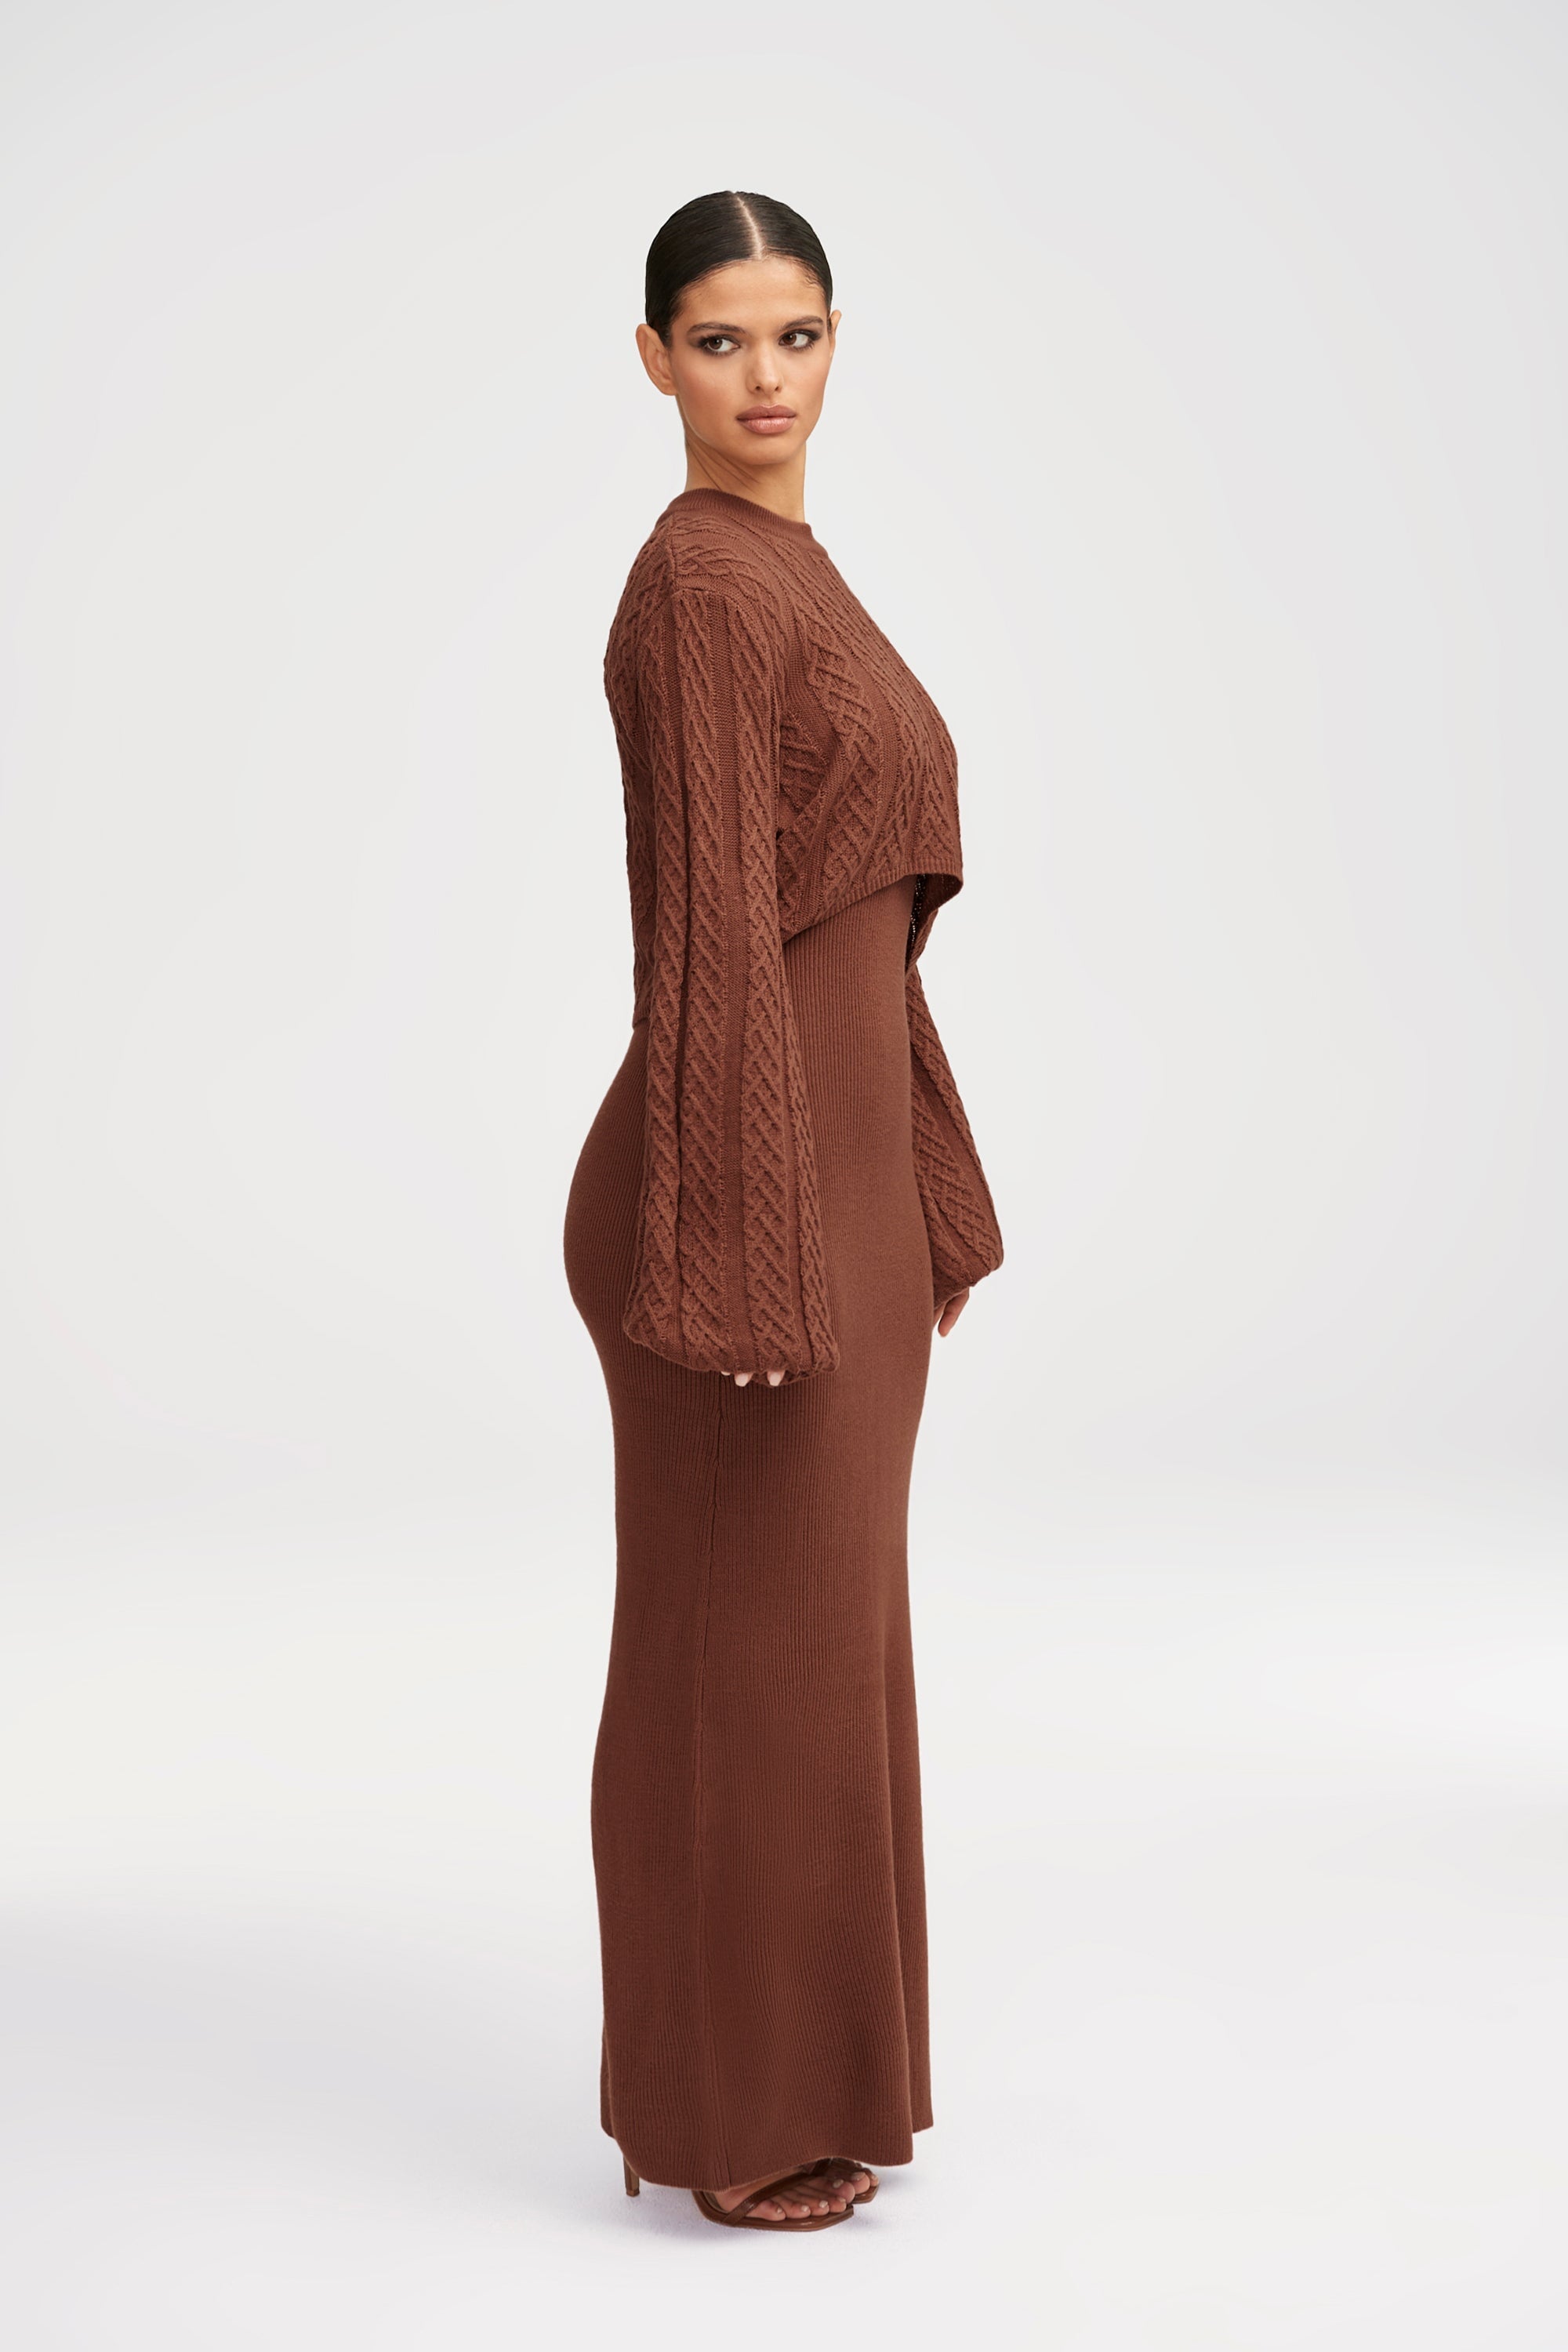 Heather Knit Maxi Dress and Top Set Clothing Veiled 